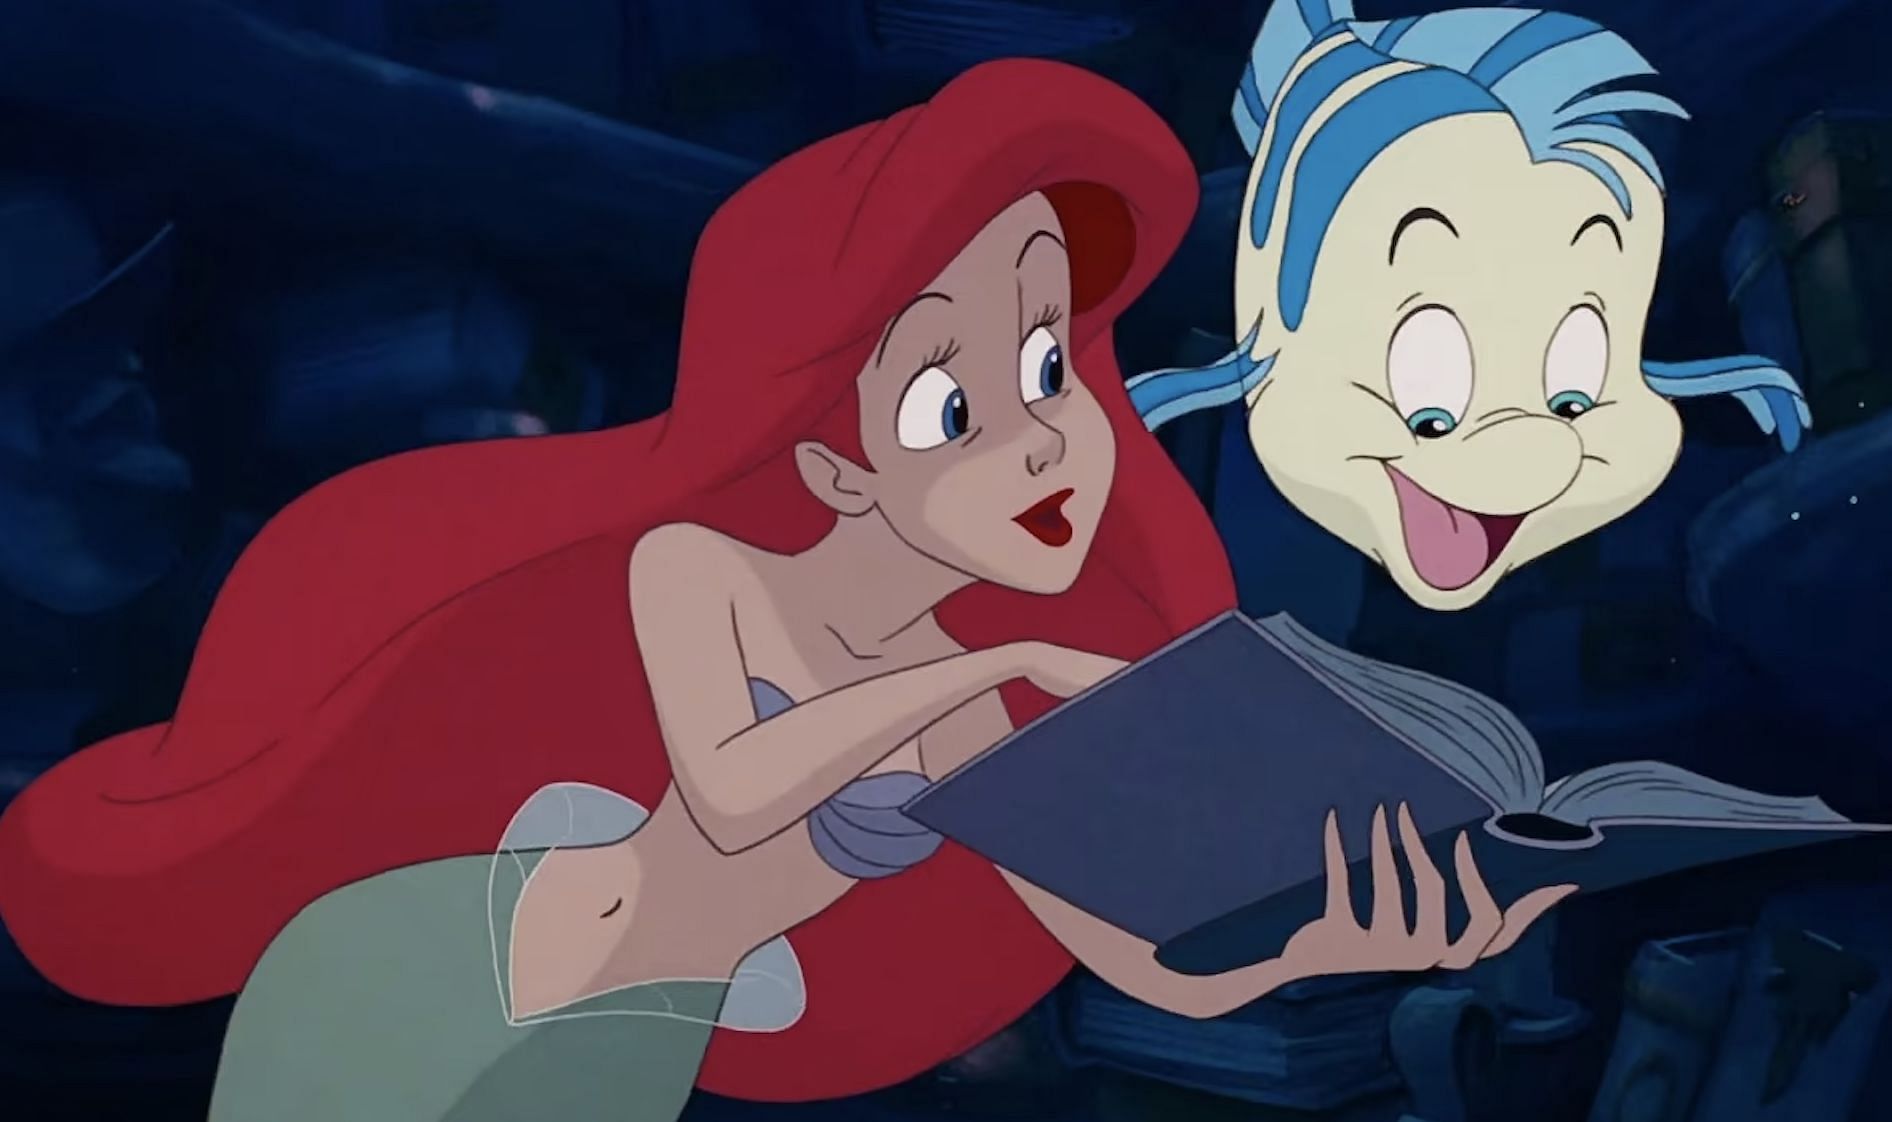 Some fans feel that the changes made to the characters are disrespectful to the original creators and take away from the legacy of the original The Little Mermaid (Image via Disney)